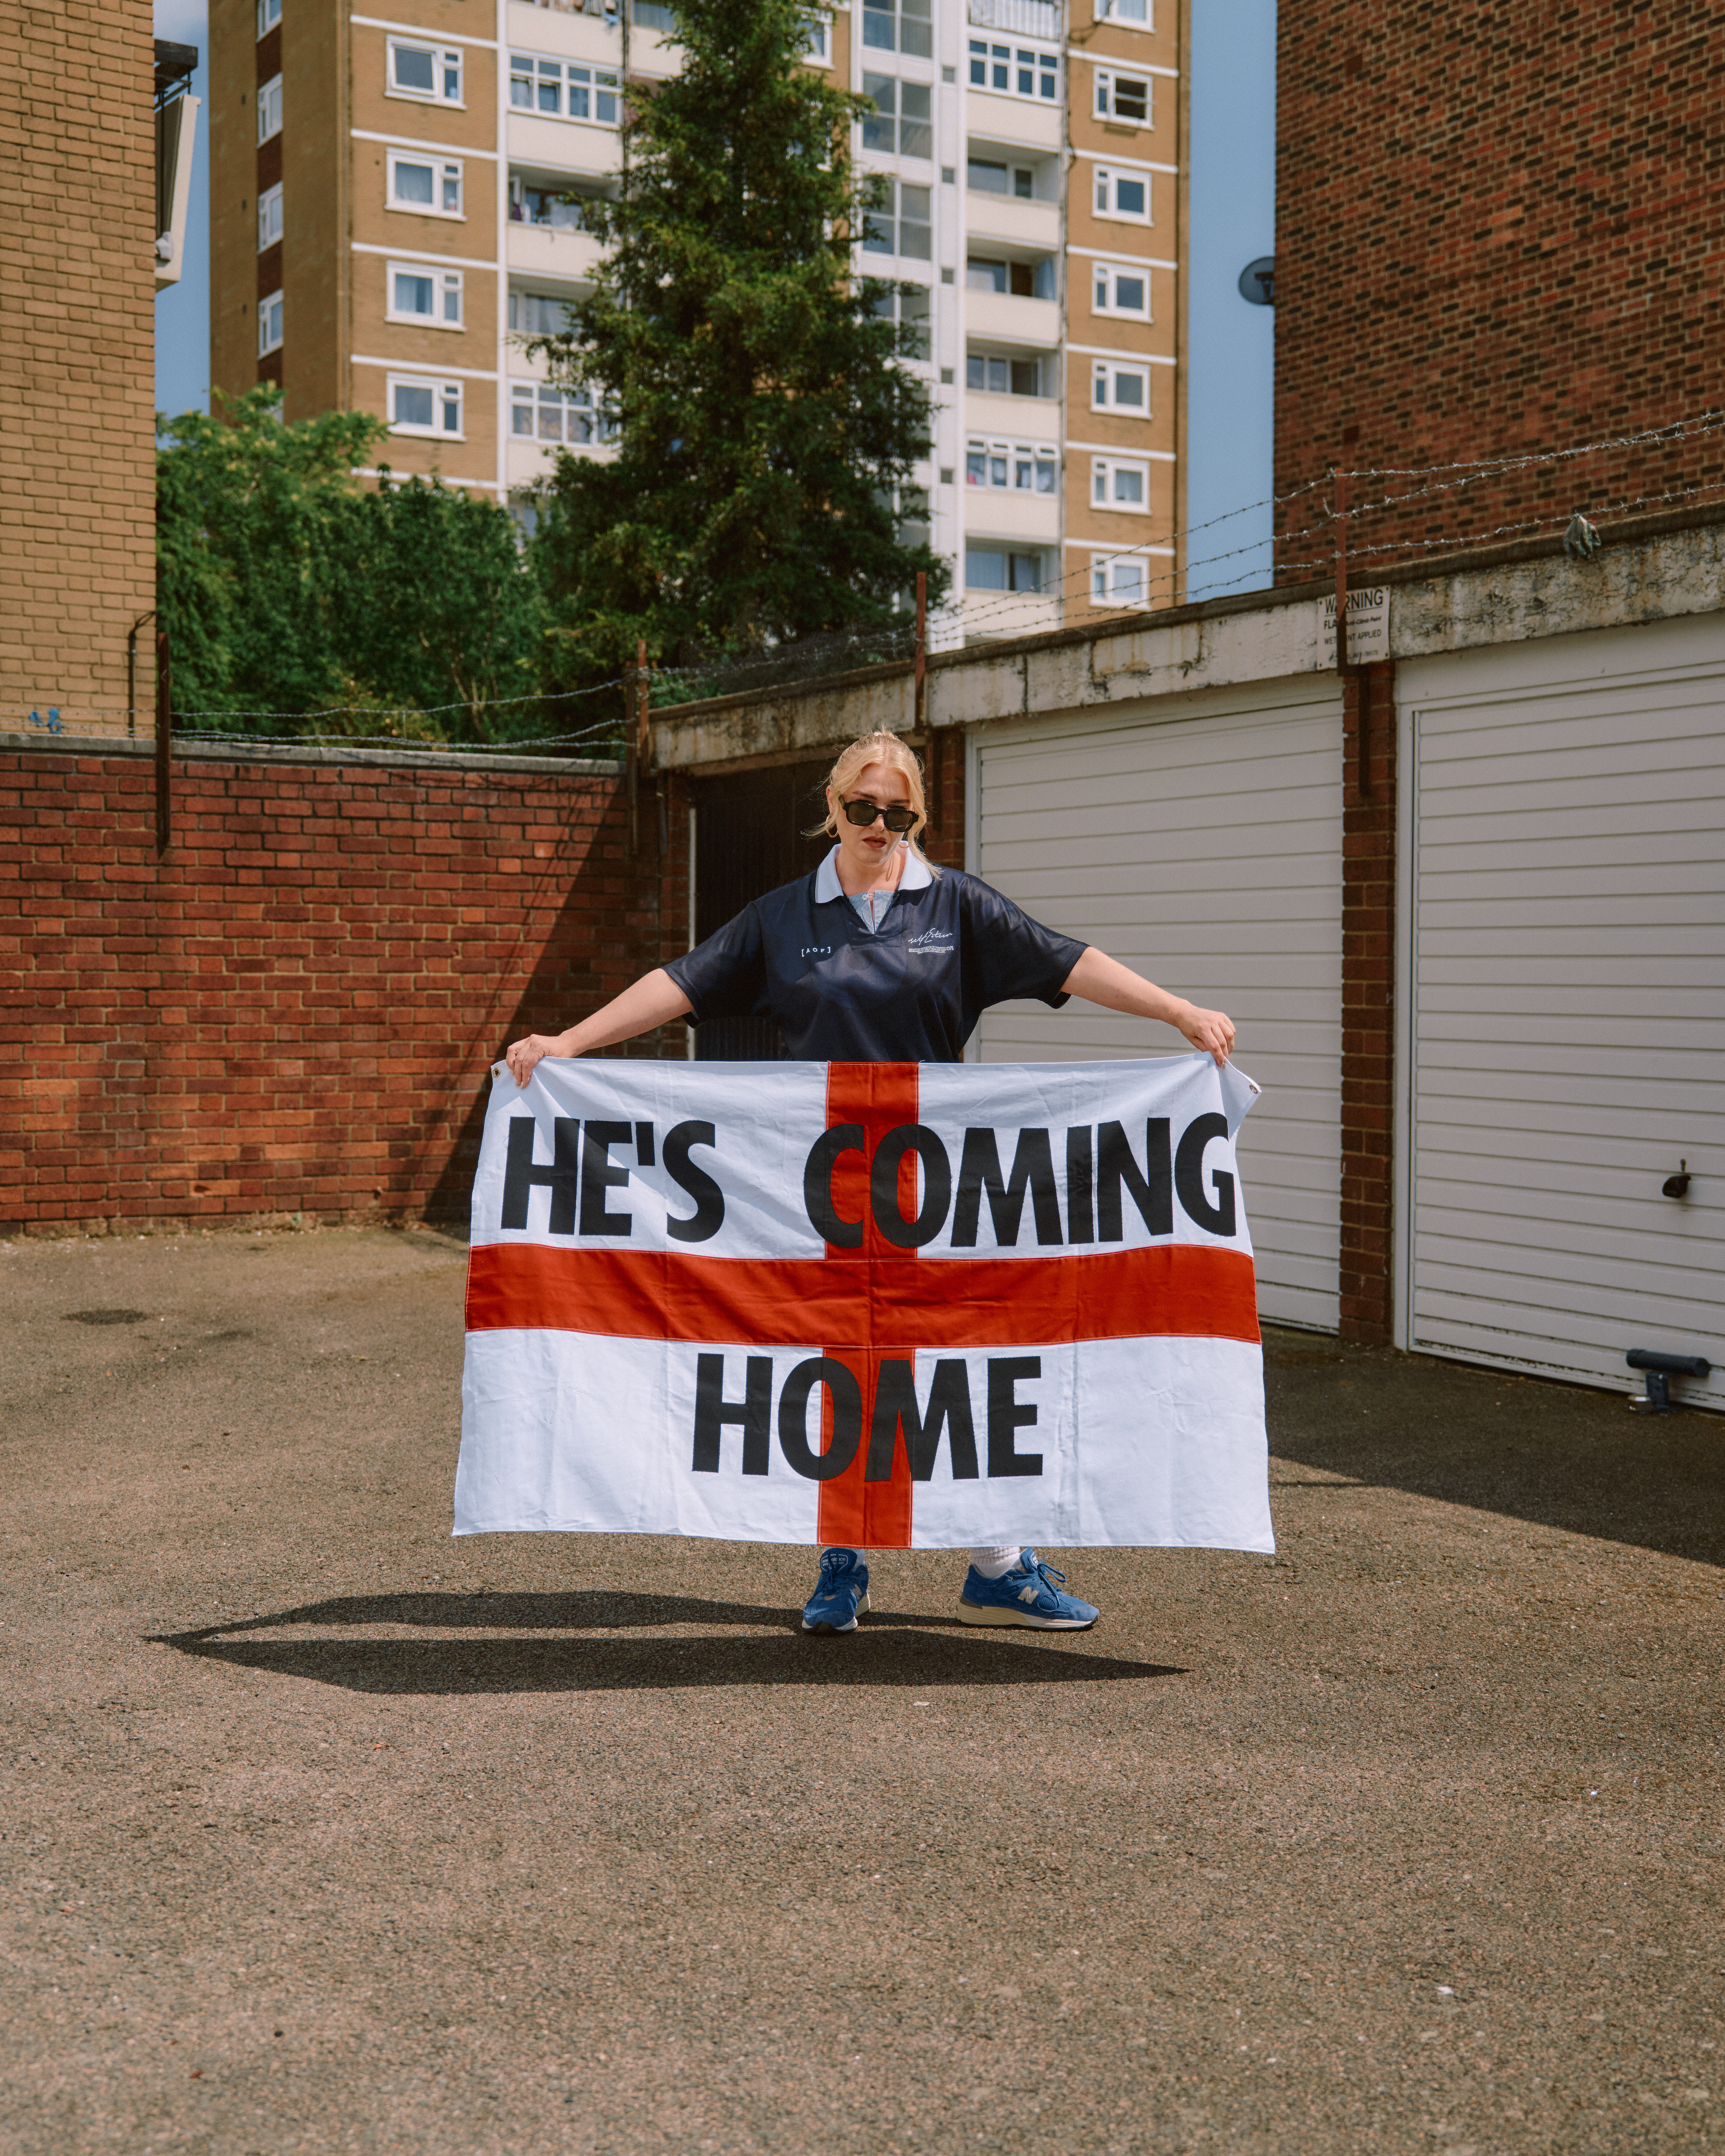 Self Esteem with an England flag with the words "he's coming home" on it